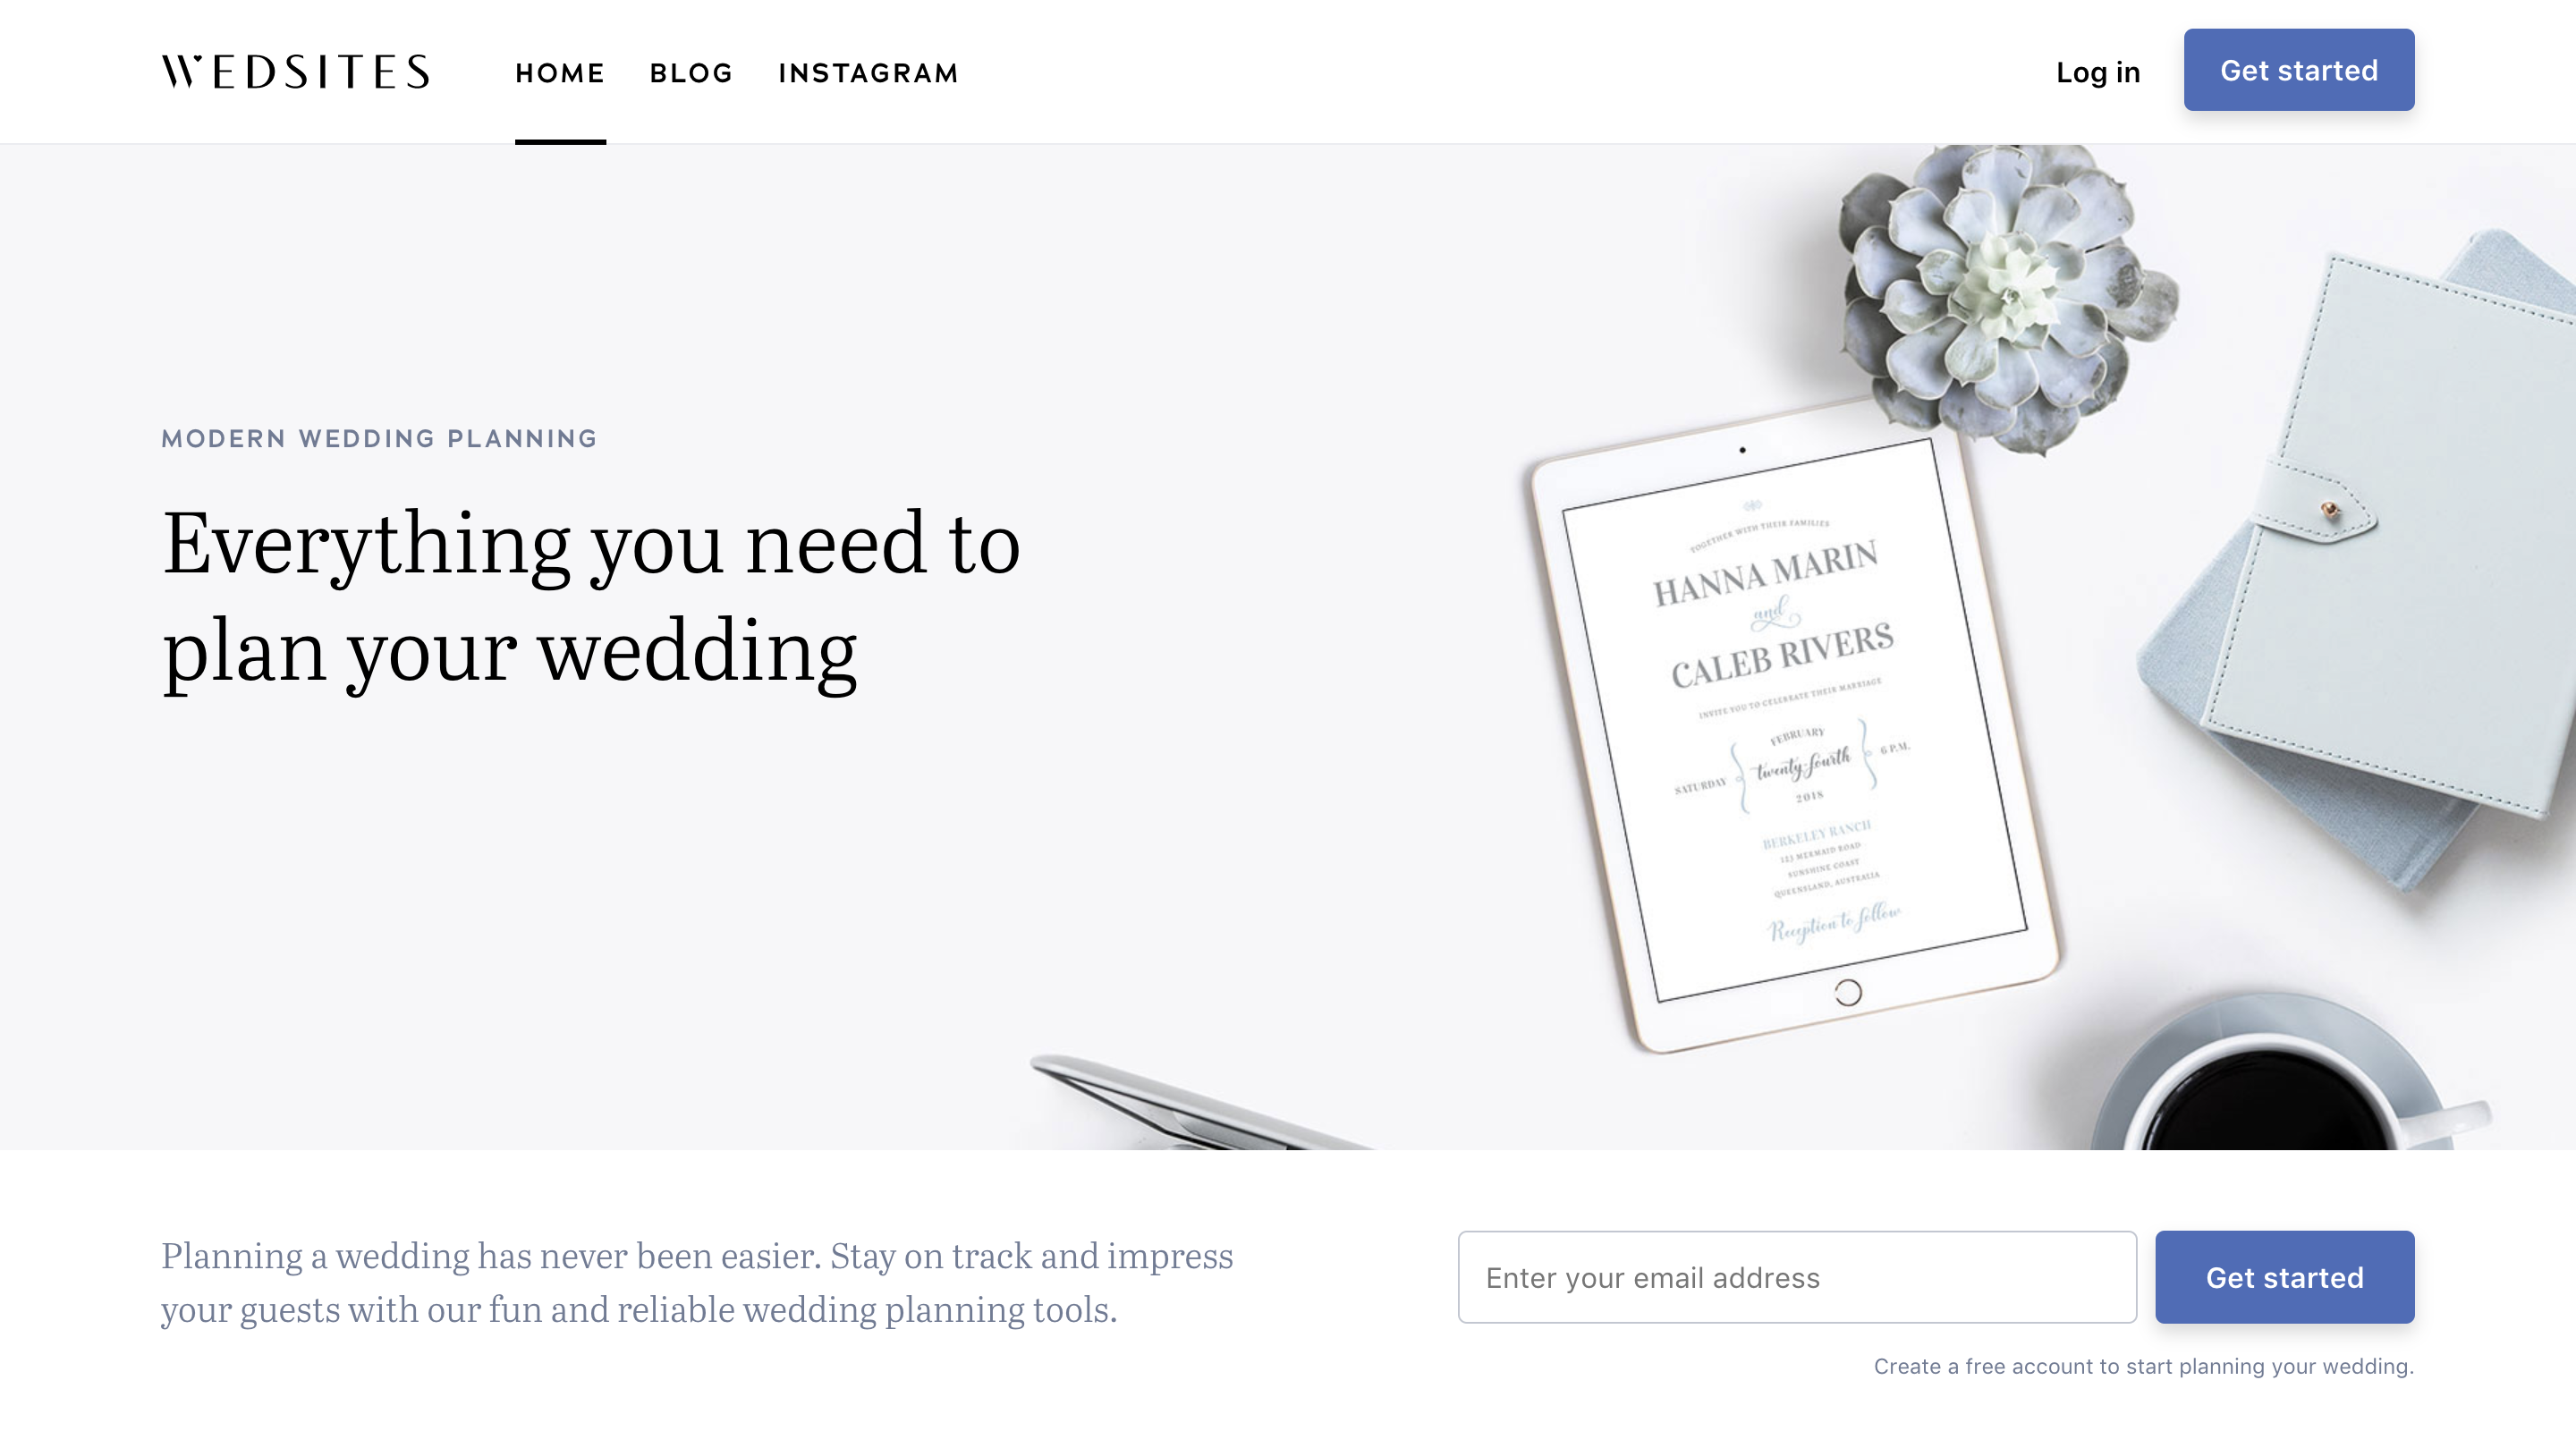 7-awesome-wedding-planning-resources-australian-brides